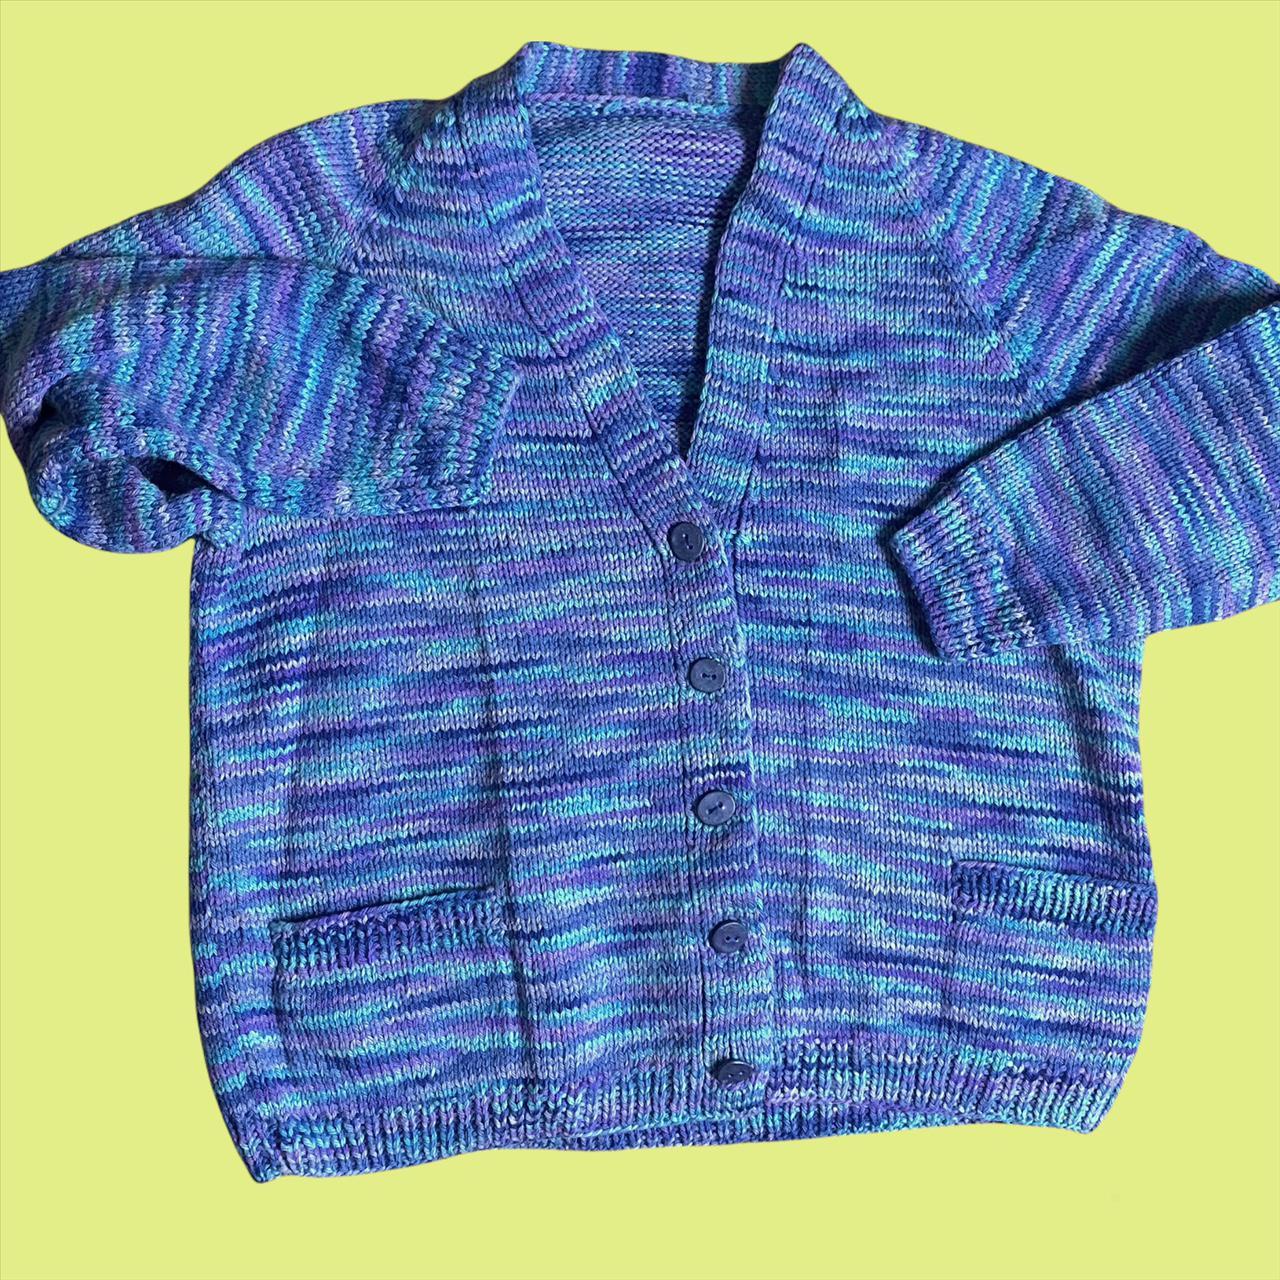 Product Image 2 - Vintage Cardigan Sweater 

Chunky Knit
No